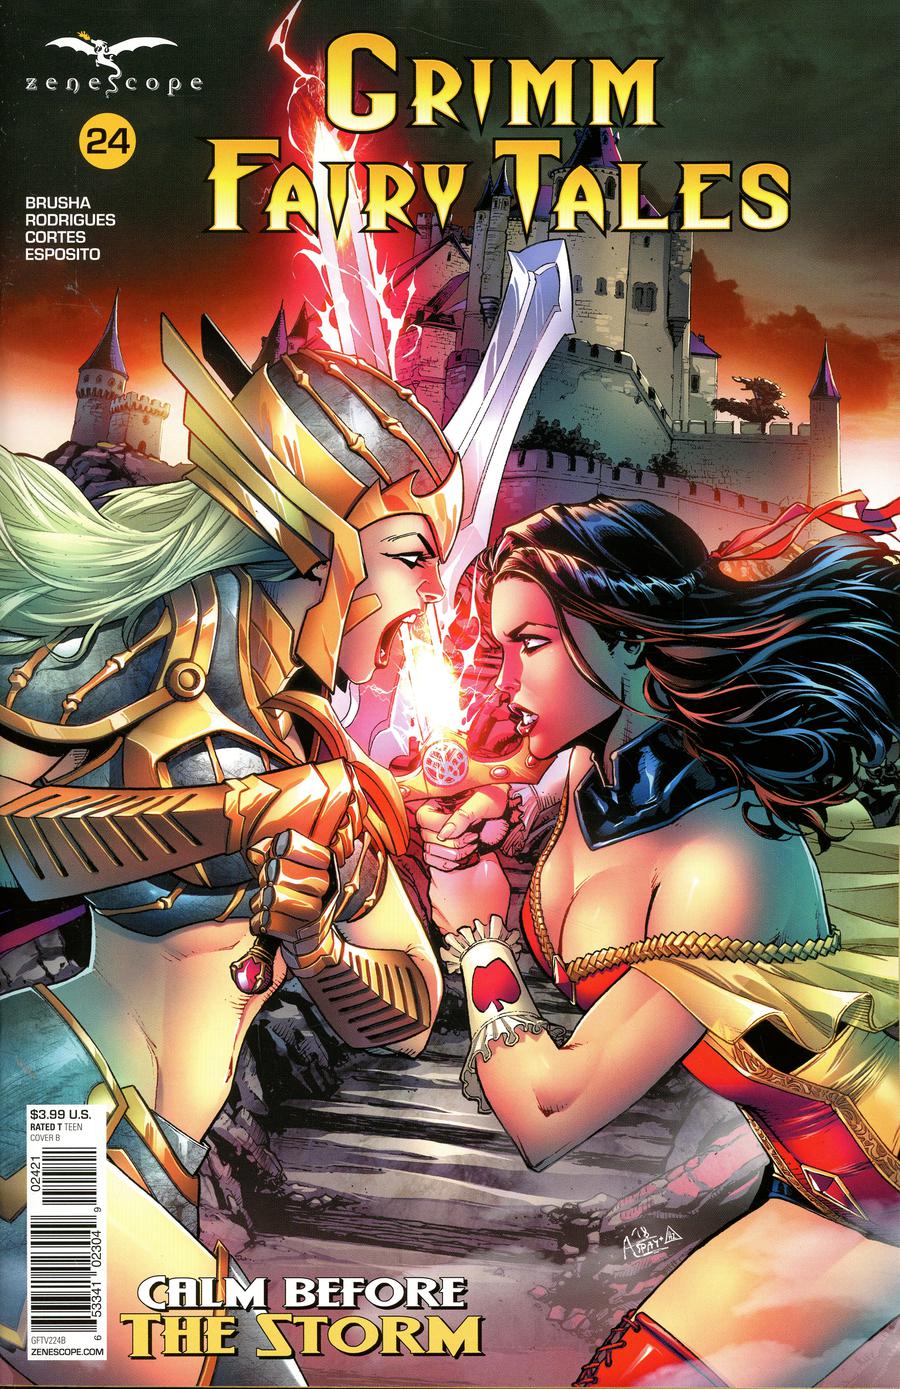 Grimm Fairy Tales Vol 2 #24 Cover B Anthony Spay